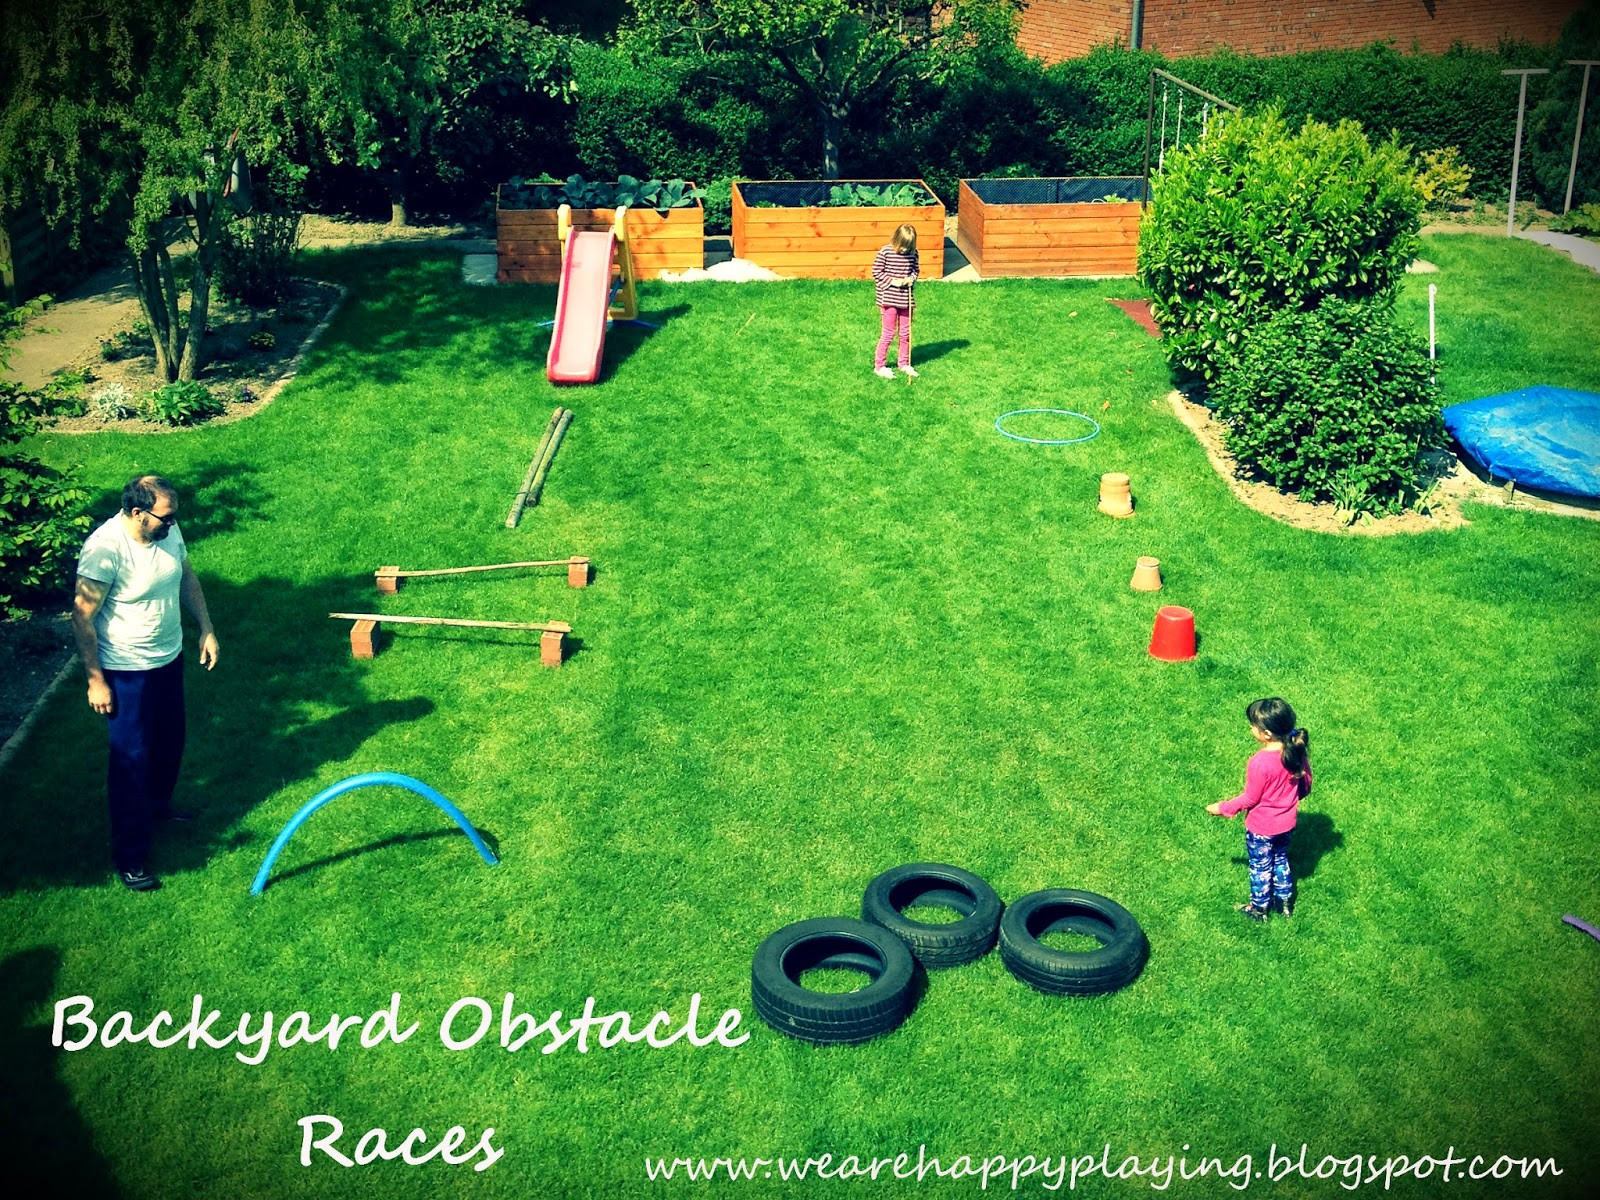 Diy Kids Obstacle Course
 We are Happy Playing DIY Backyard obstacle races without